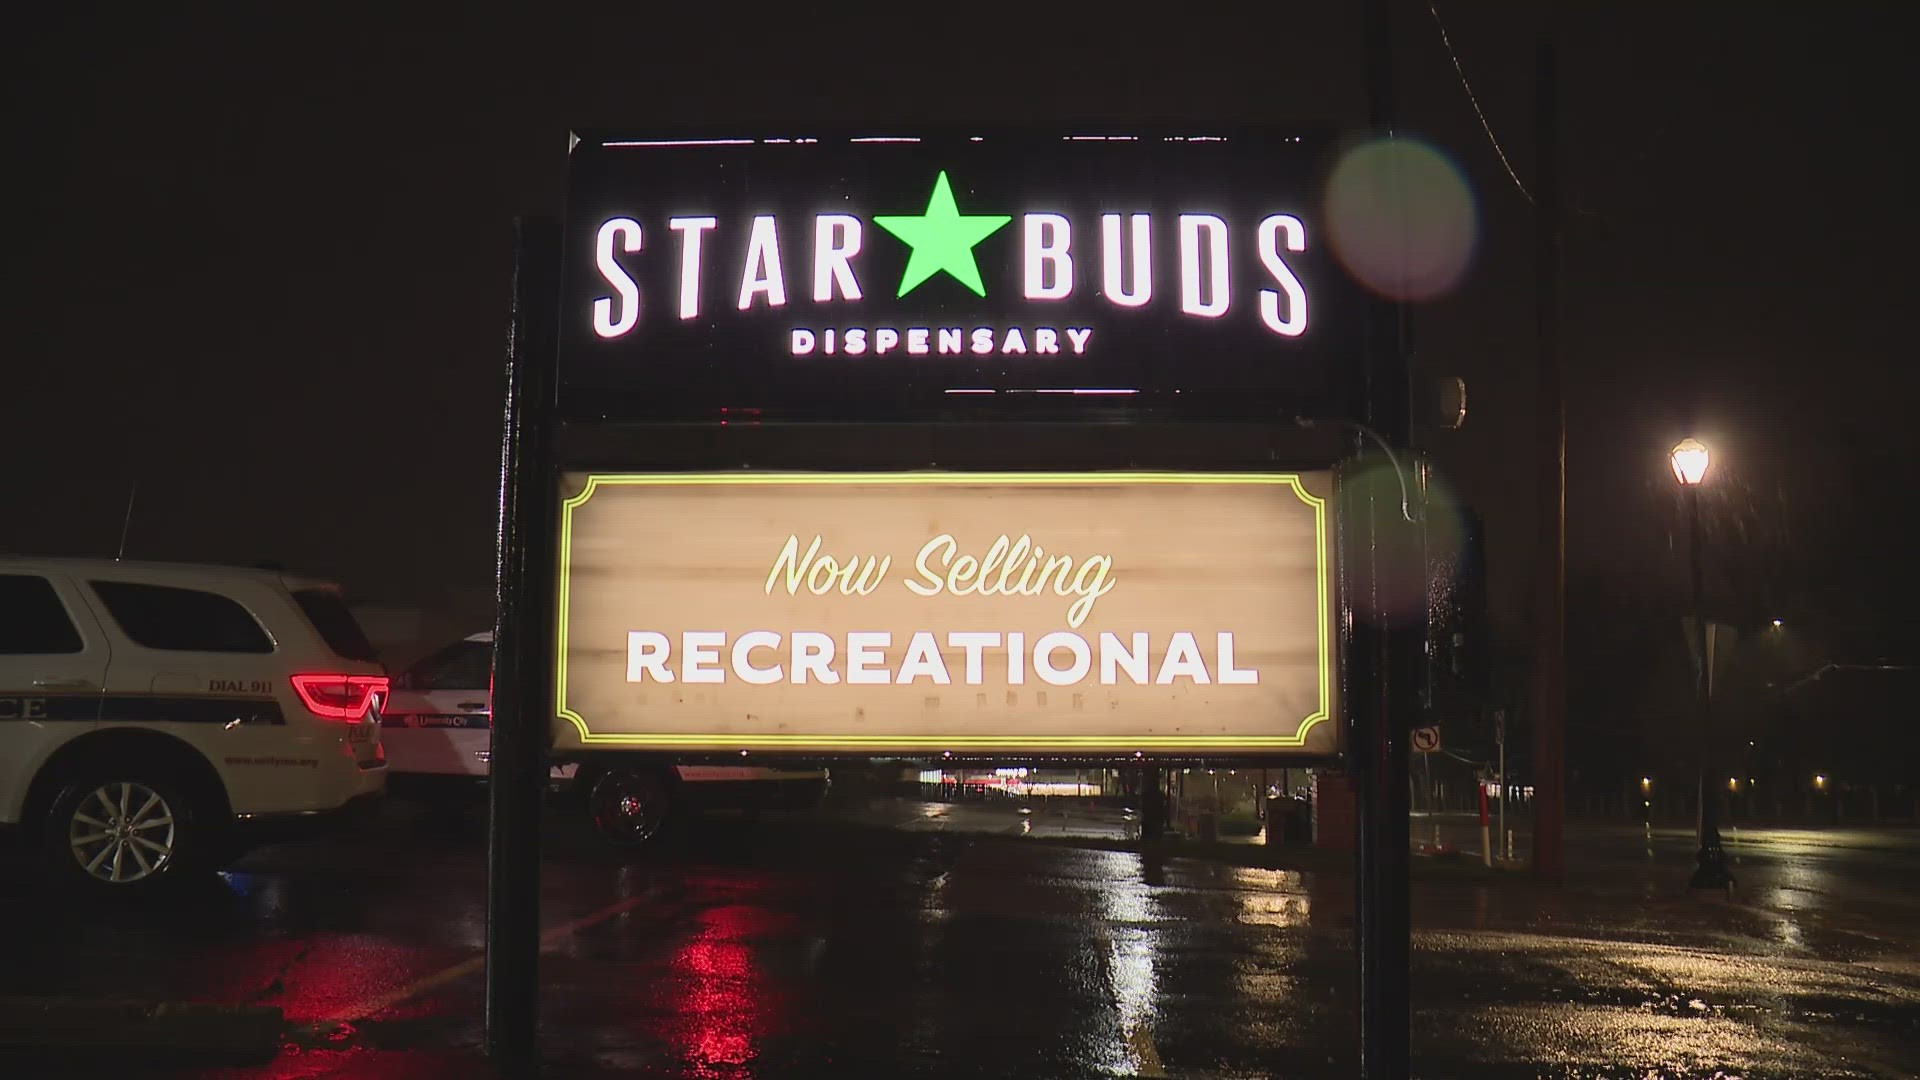 Star Buds dispensary along Olive Boulevard was broken into at about 2:30 a.m. Friday. The glass in the front door was busted and broken.